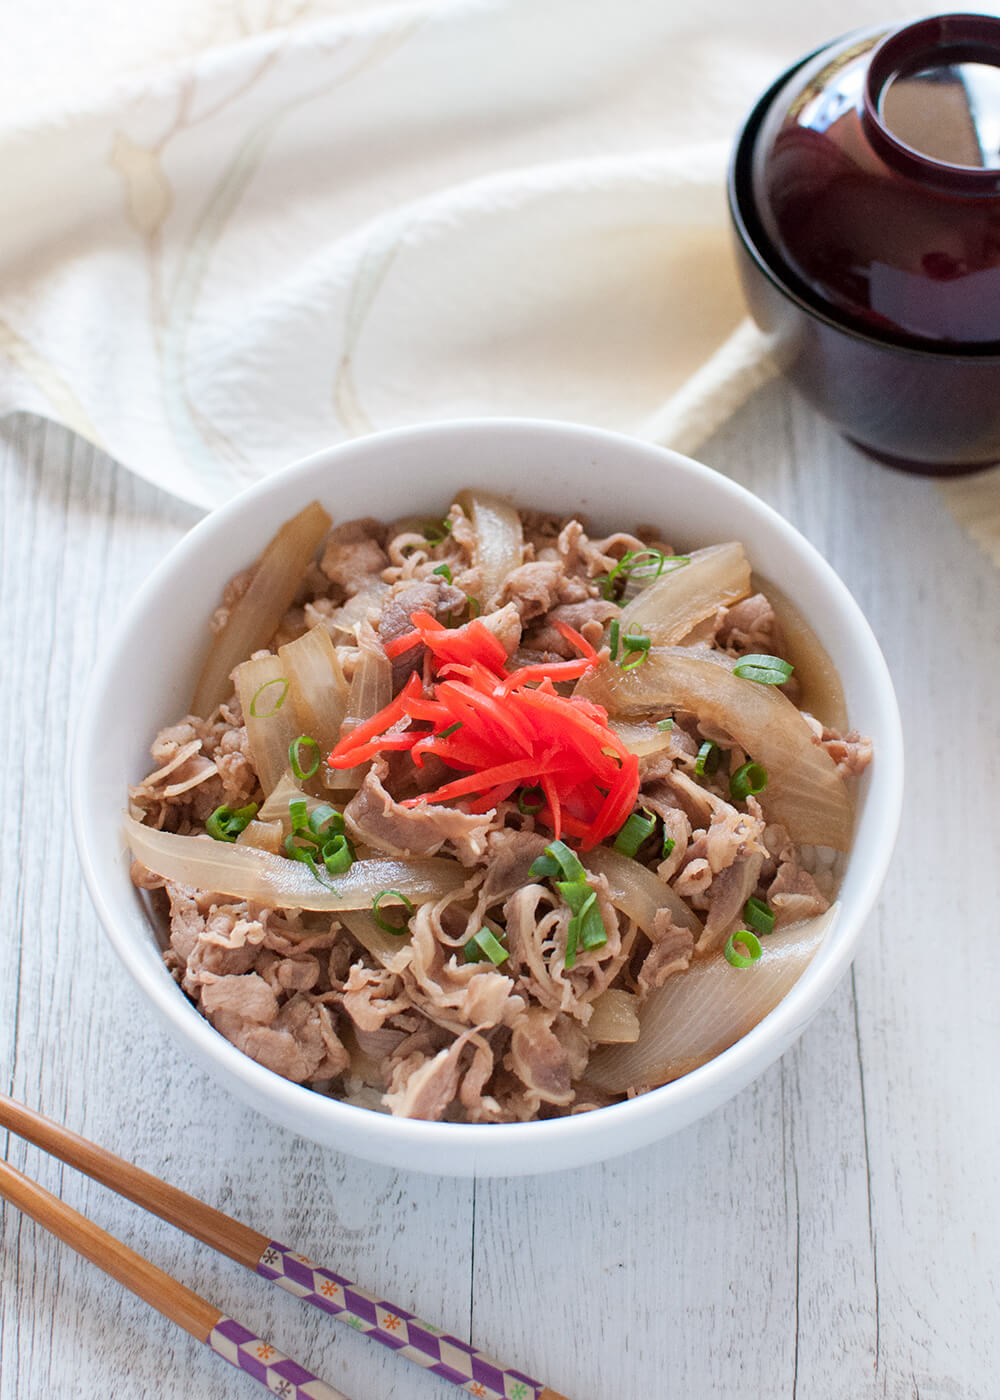 Japanese Beef bowl (Gyū-don) is a popular one-bowl dish that consists of a bowl of rice topped with thinly sliced beef and onions simmered in sweet soy-flavoured sauce. It is so quick to make, tasty and filling – a perfect mid-week family meal.